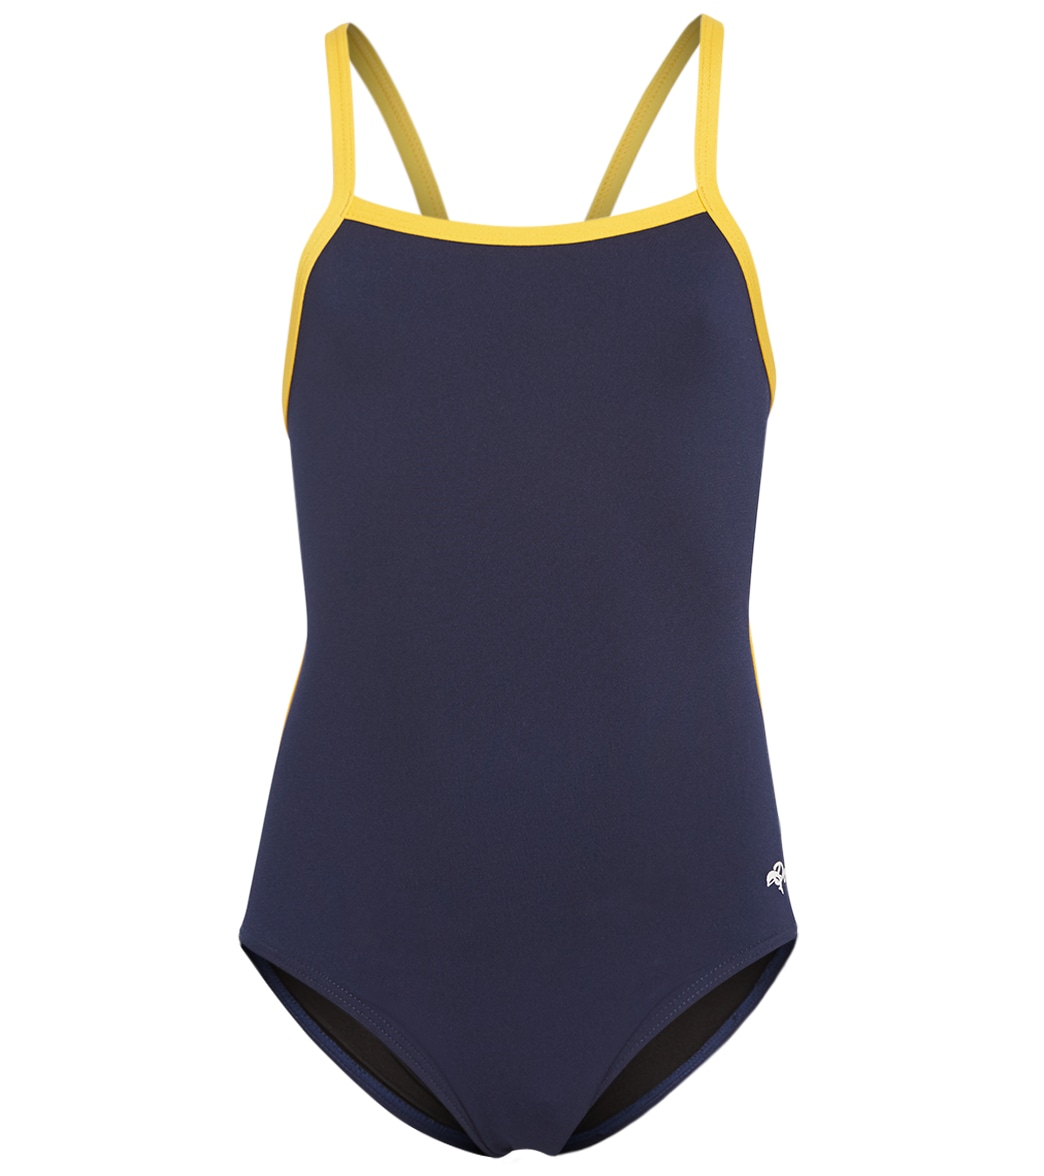 Dolfin All Poly Youth Varsity Solid String Back - Navy/Gold 22 Swimsuit - Swimoutlet.com